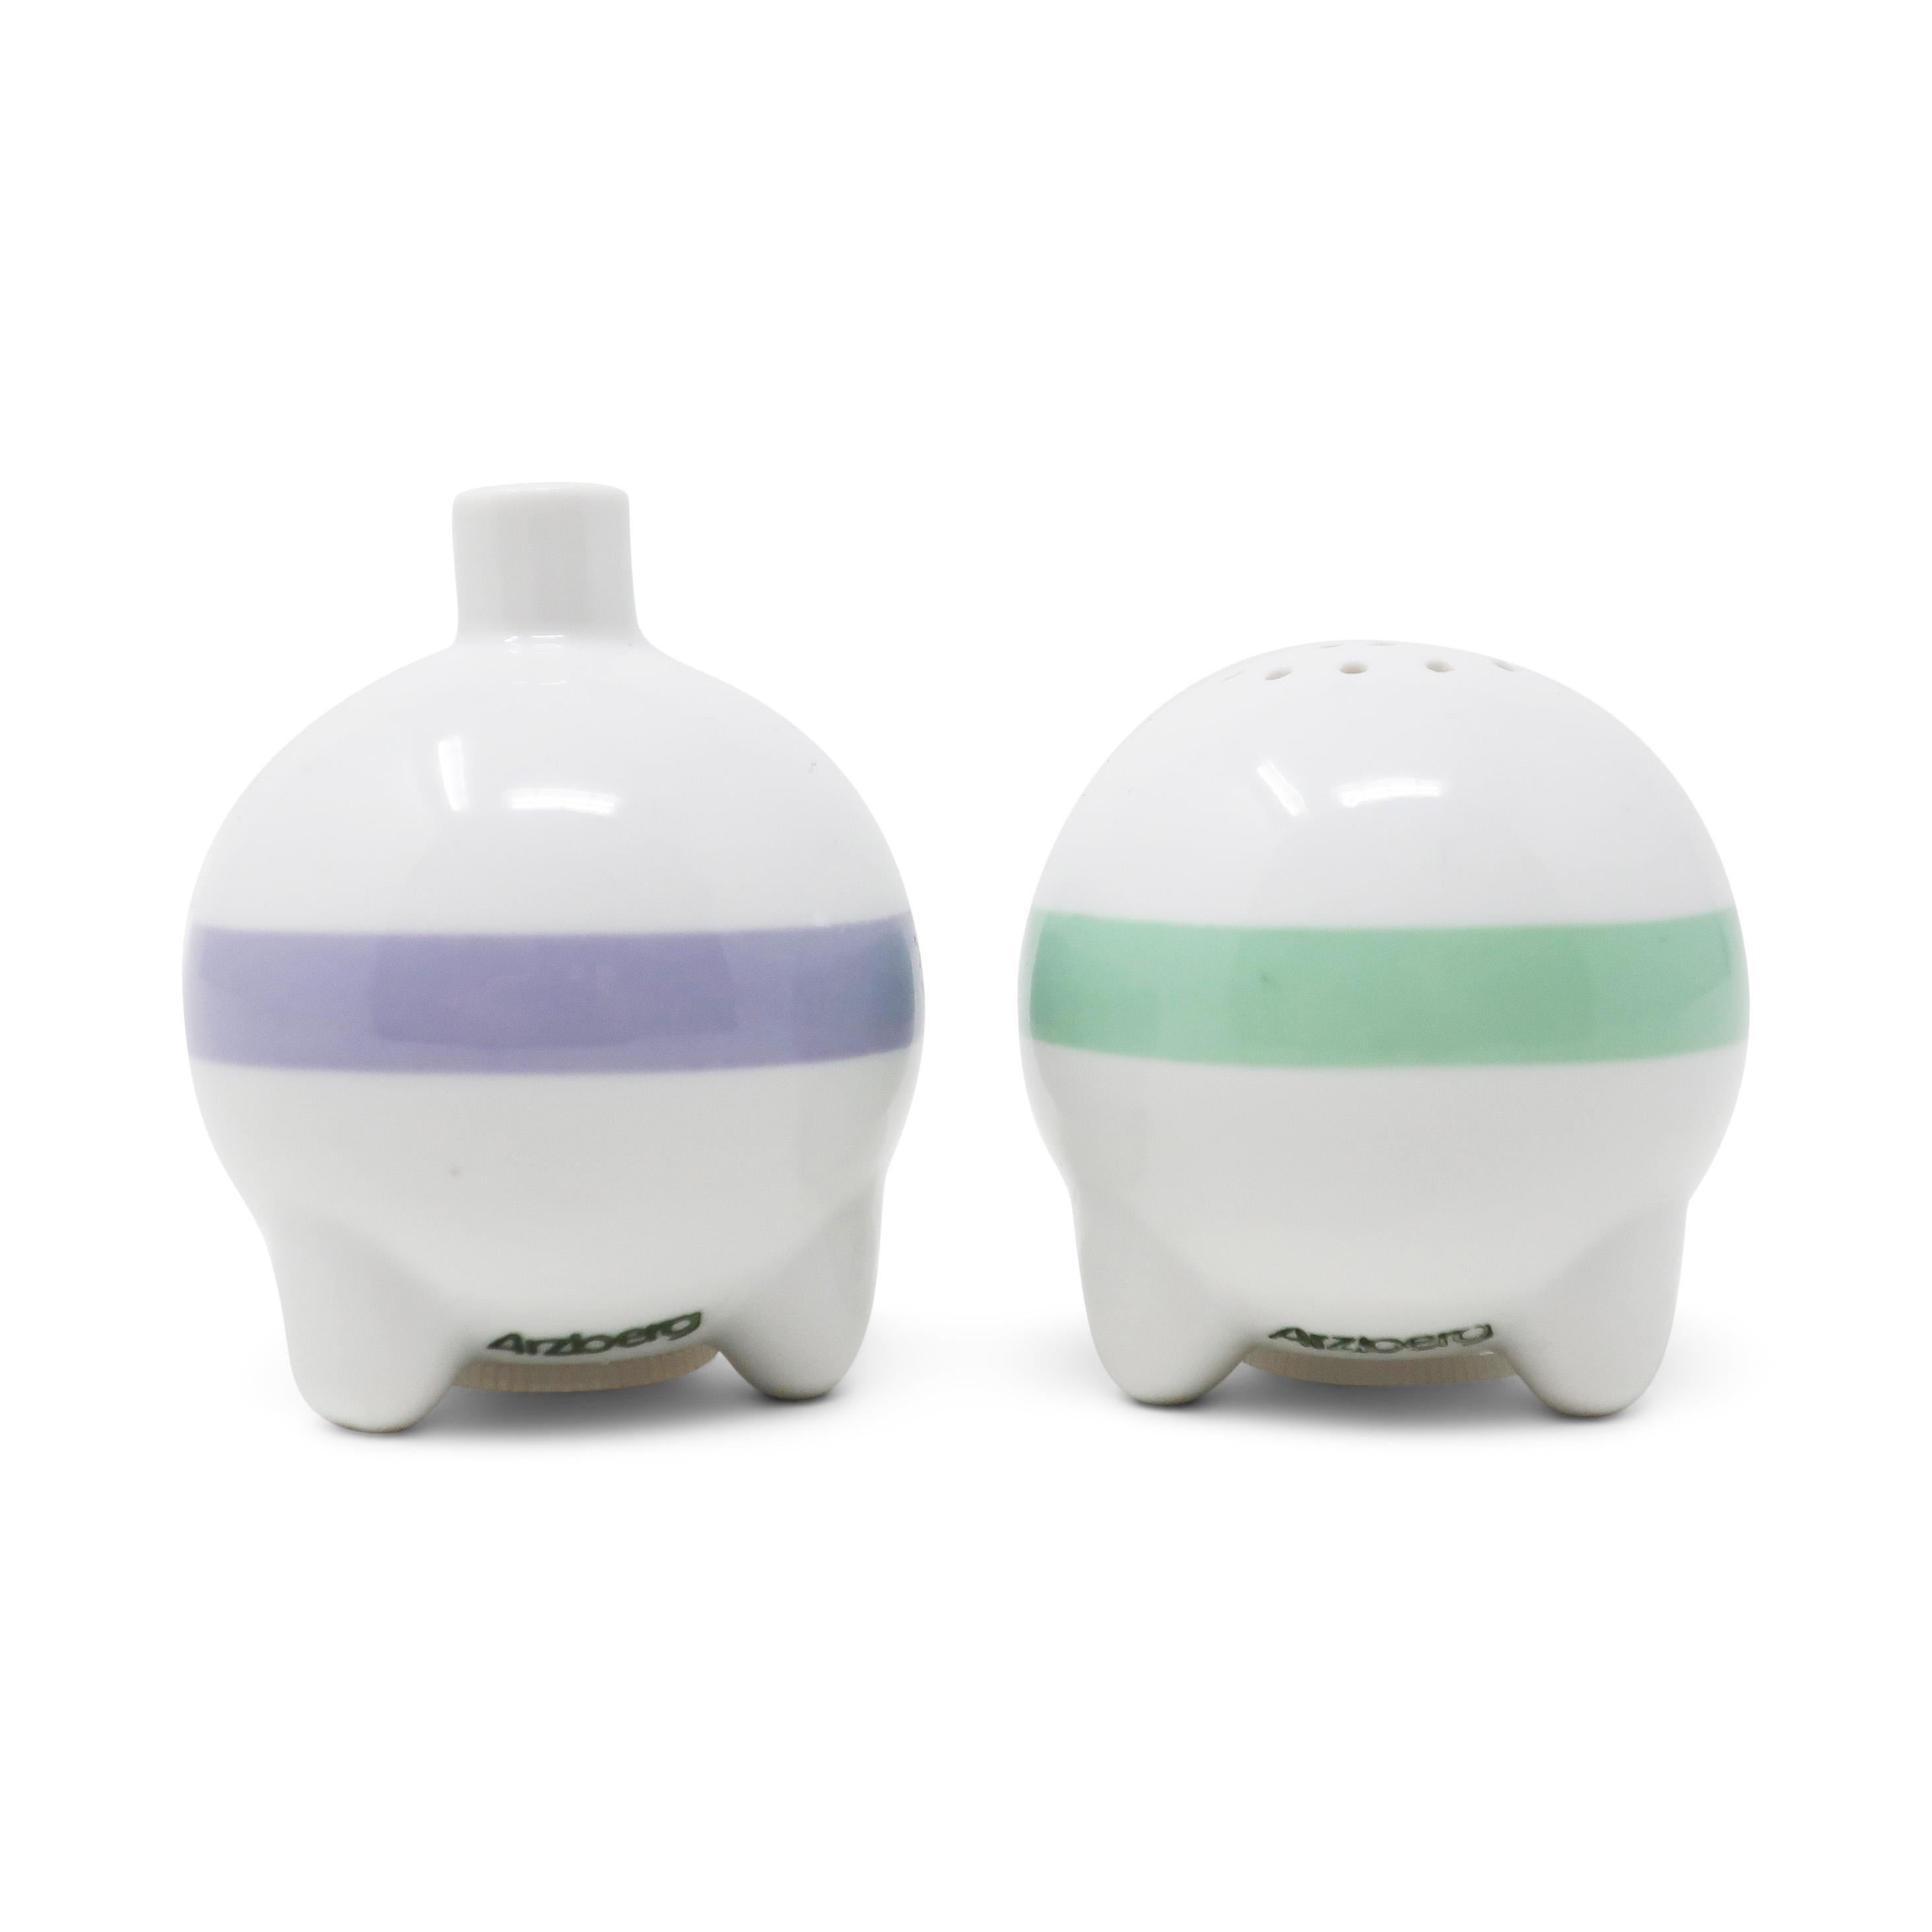 Pair of postmodern salt and pepper shakers from Matteo Thun's 